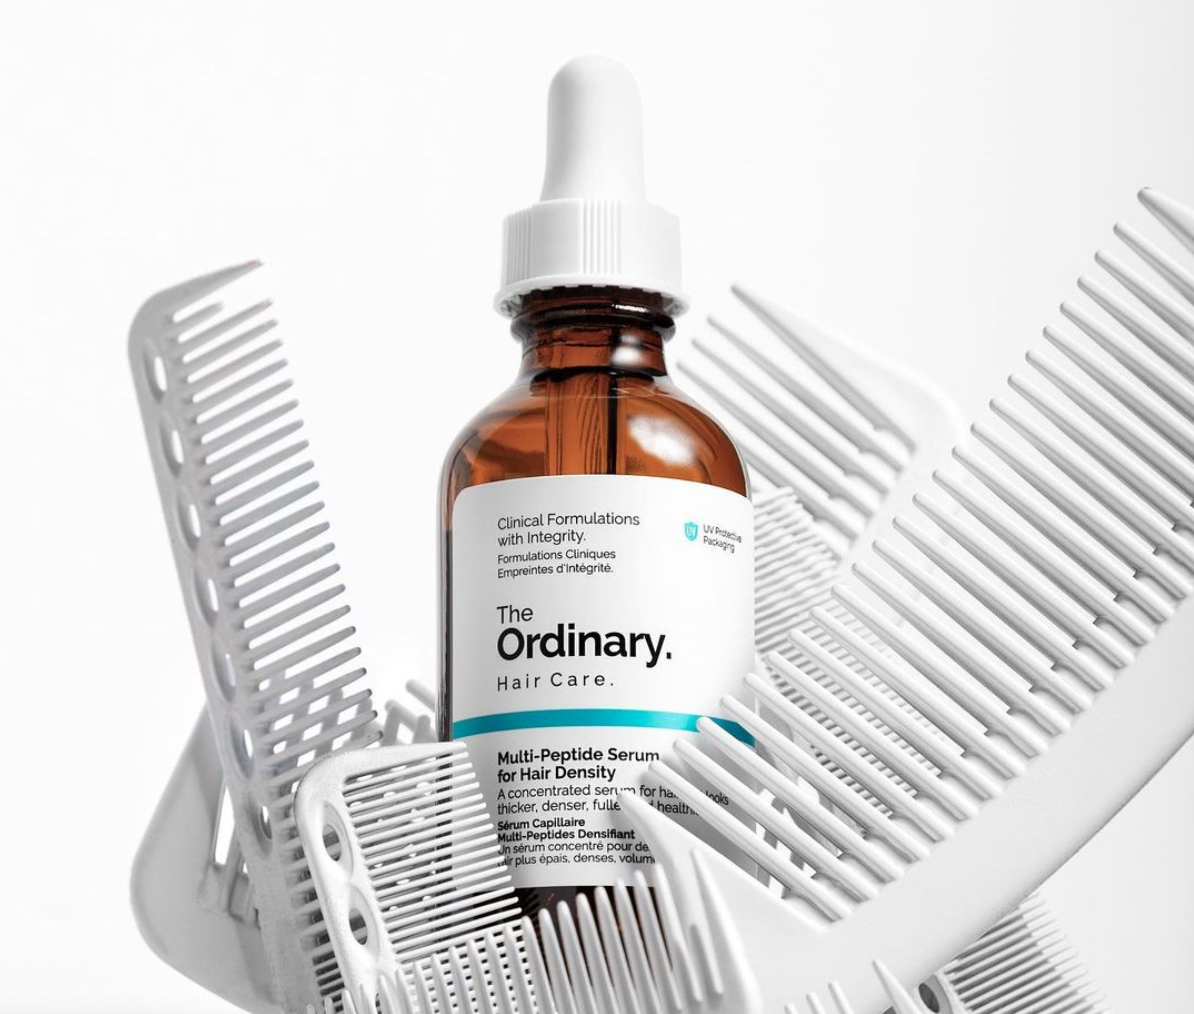  The-Ordinary-Multi-Peptide-Serum-for-Hair-Density-Cover